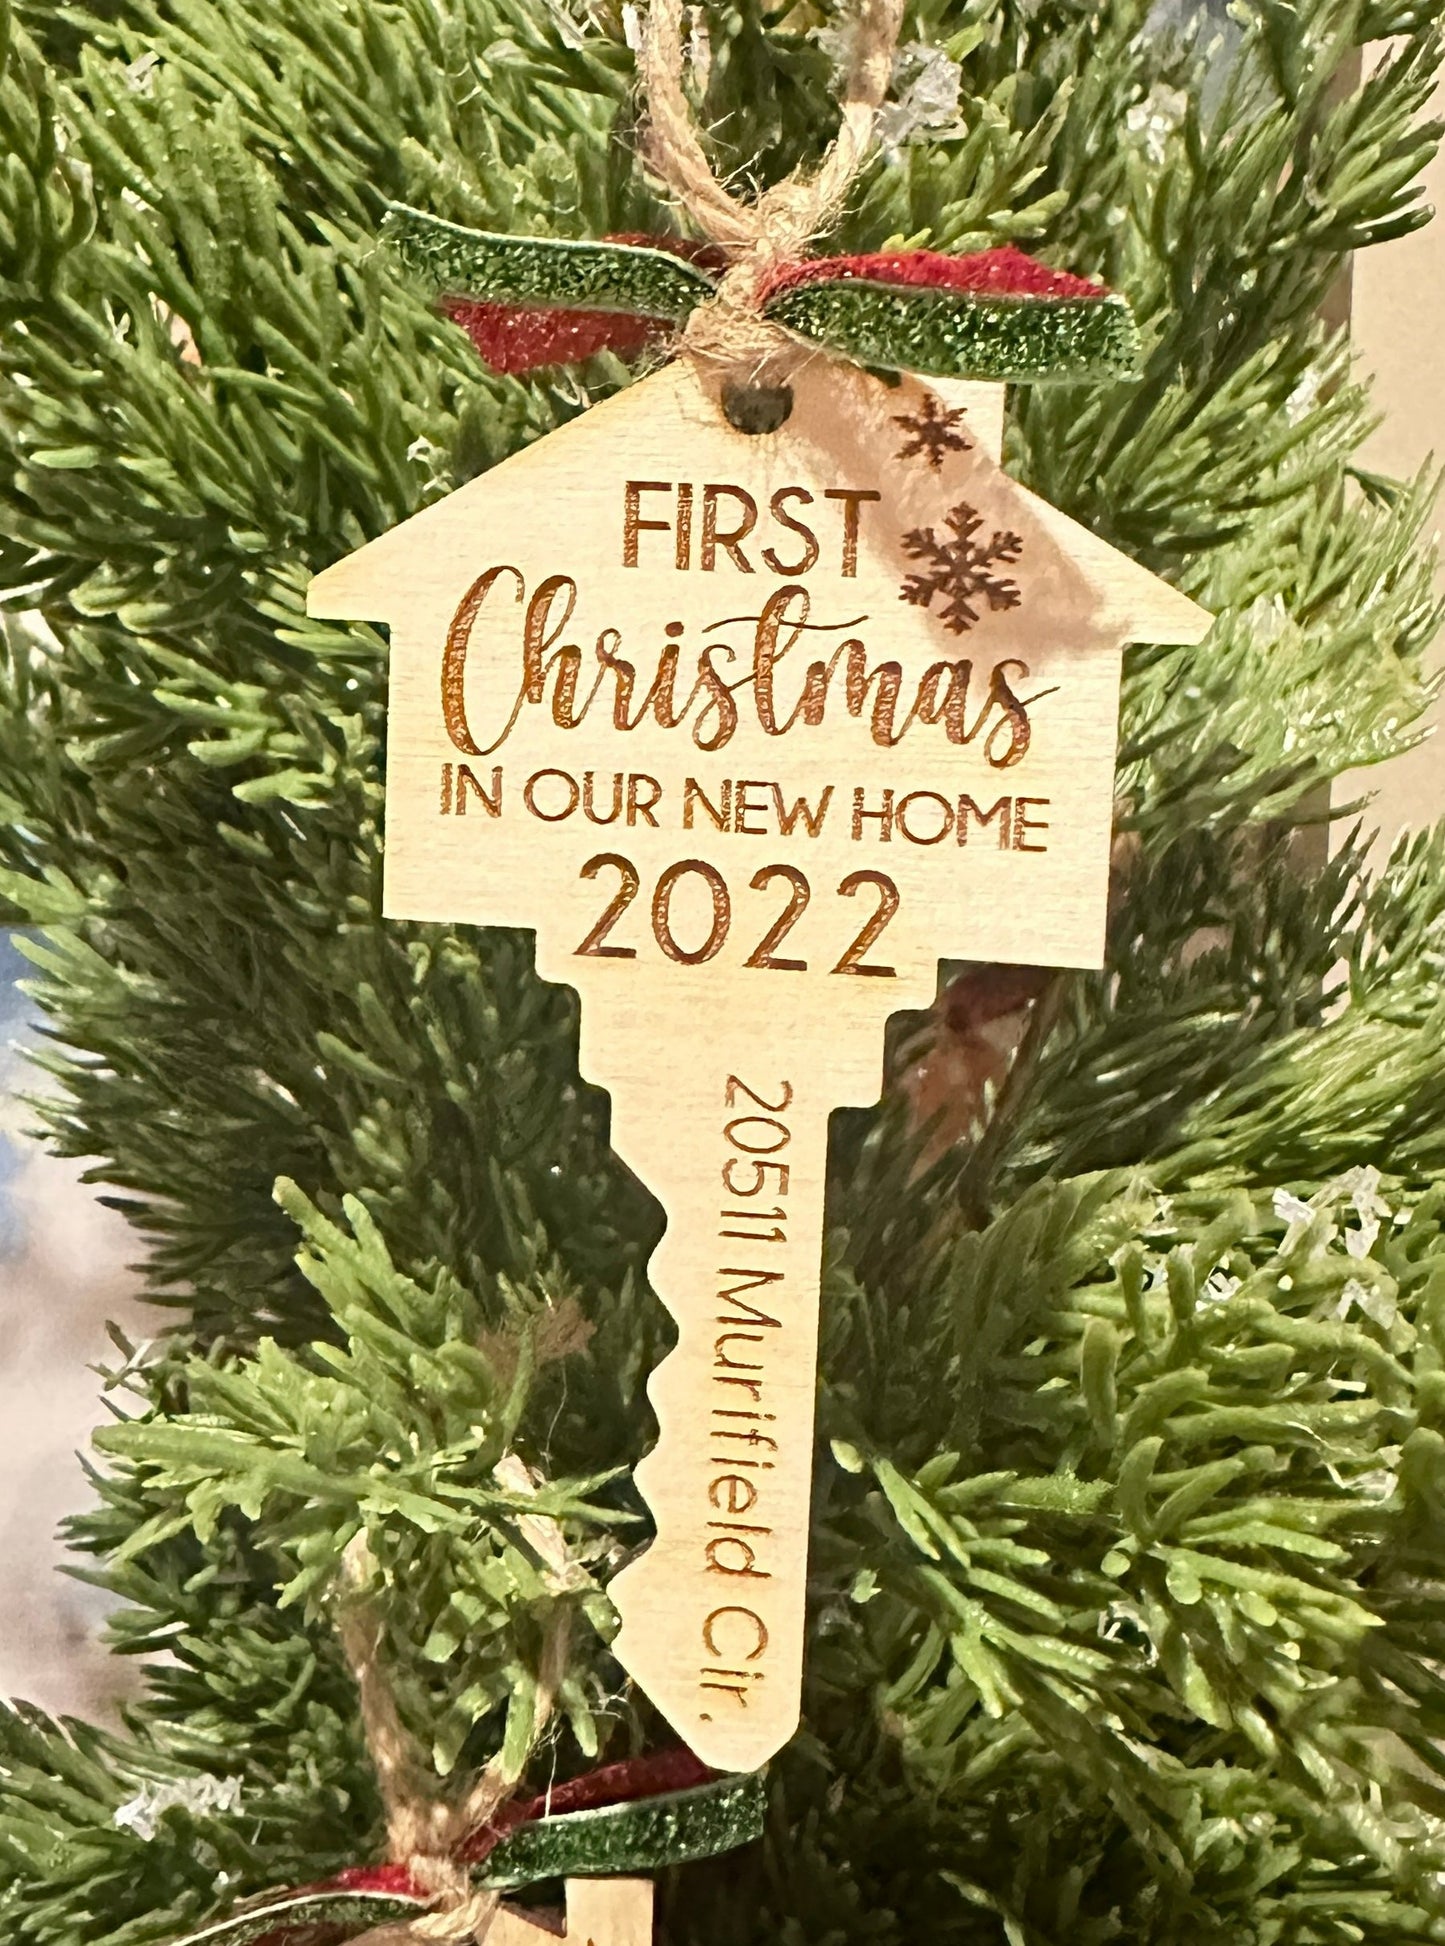 New Home Personalized Ornaments | First Christmas in New Home Ornament | Wooden Christmas Ornament | Farmhouse Christmas Ornament